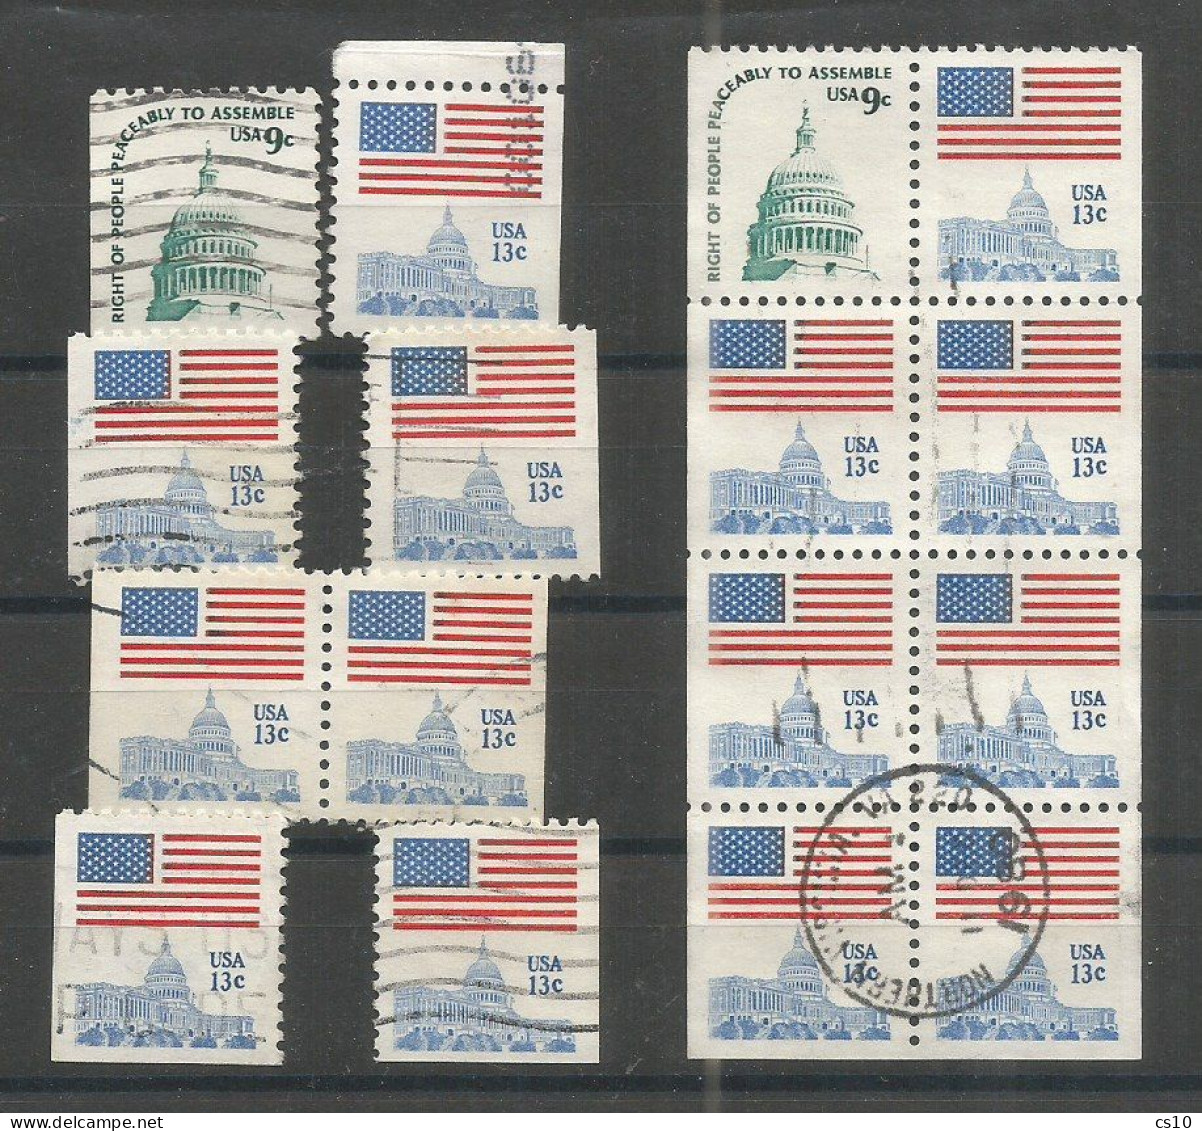 USA 1975 Americana C.9+c.13 Perf.11 Cpl Booklet Issue . Booklet Pane Used 1980 + Pair + L/R On 2/3 Sides Incl. Upper Pcs - Full Years